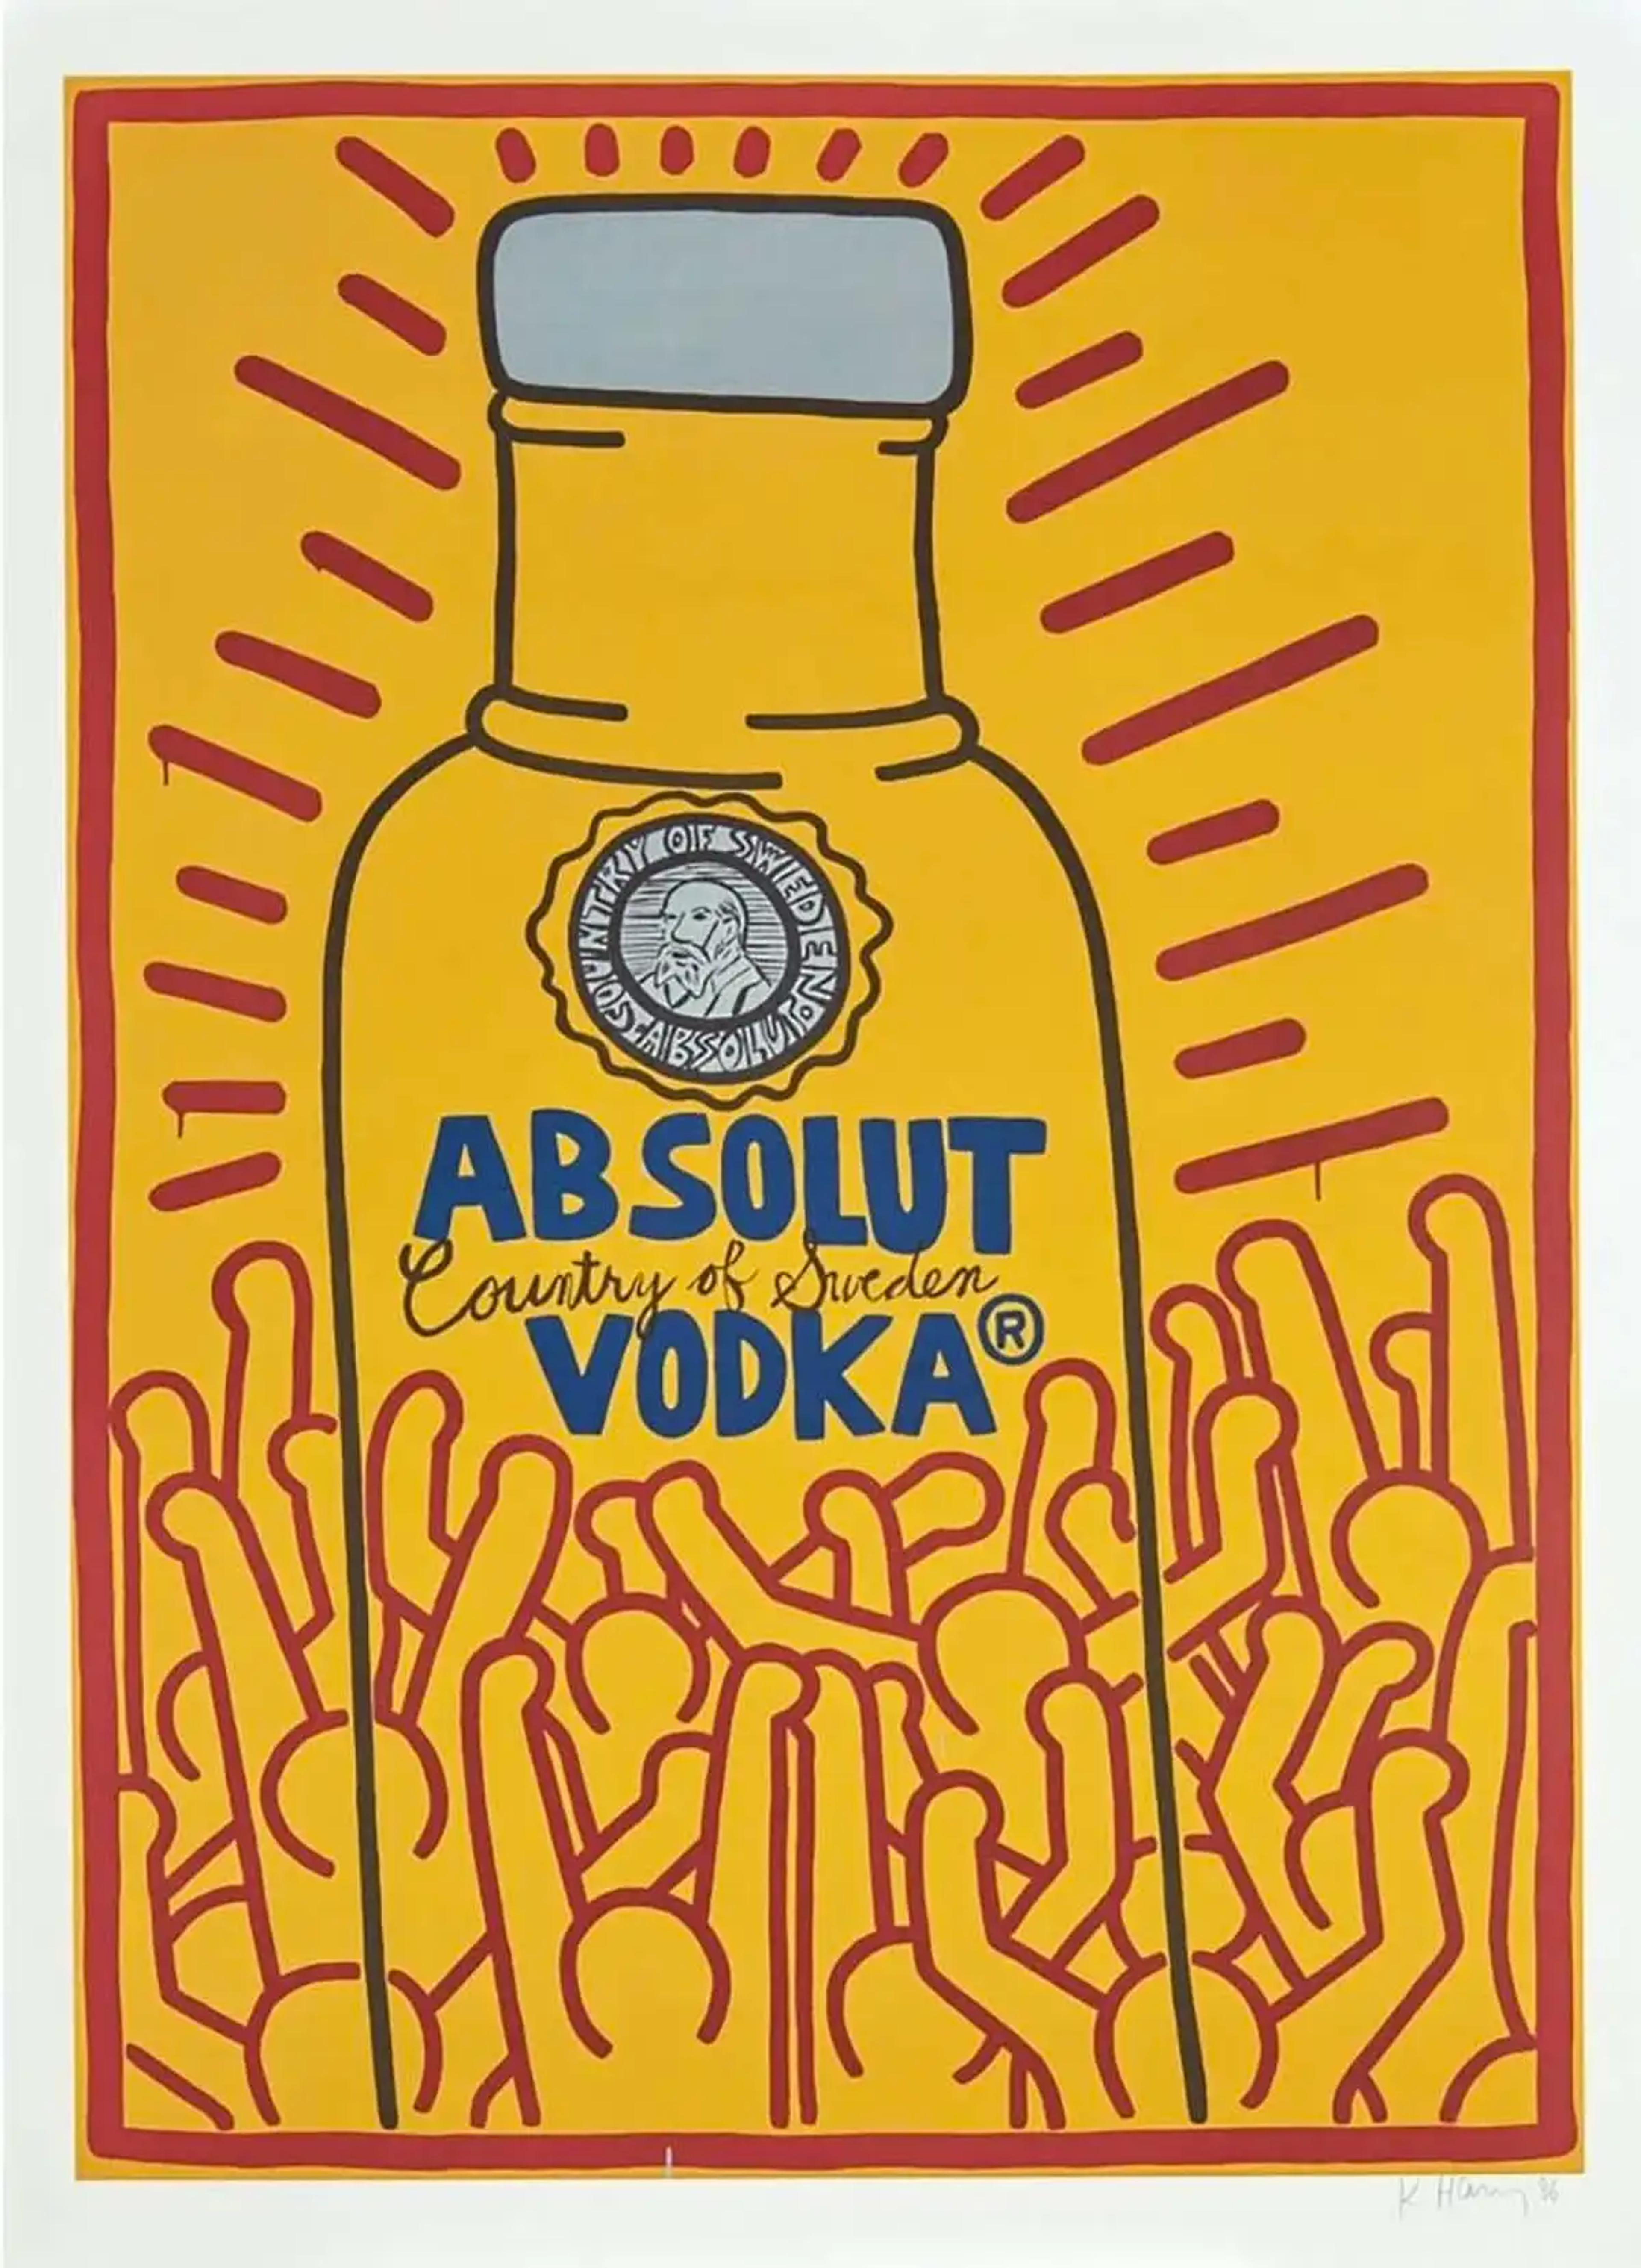 An image of the print Absolut Haring, which shows the Absolut Vodka bottle rendered in Haring’s trademark bold lines, surrounded by a crowd of genderless figures. Haring uses bold red outlines against a bright yellow backdrop that sets a contrast against the blue Absolut logo.